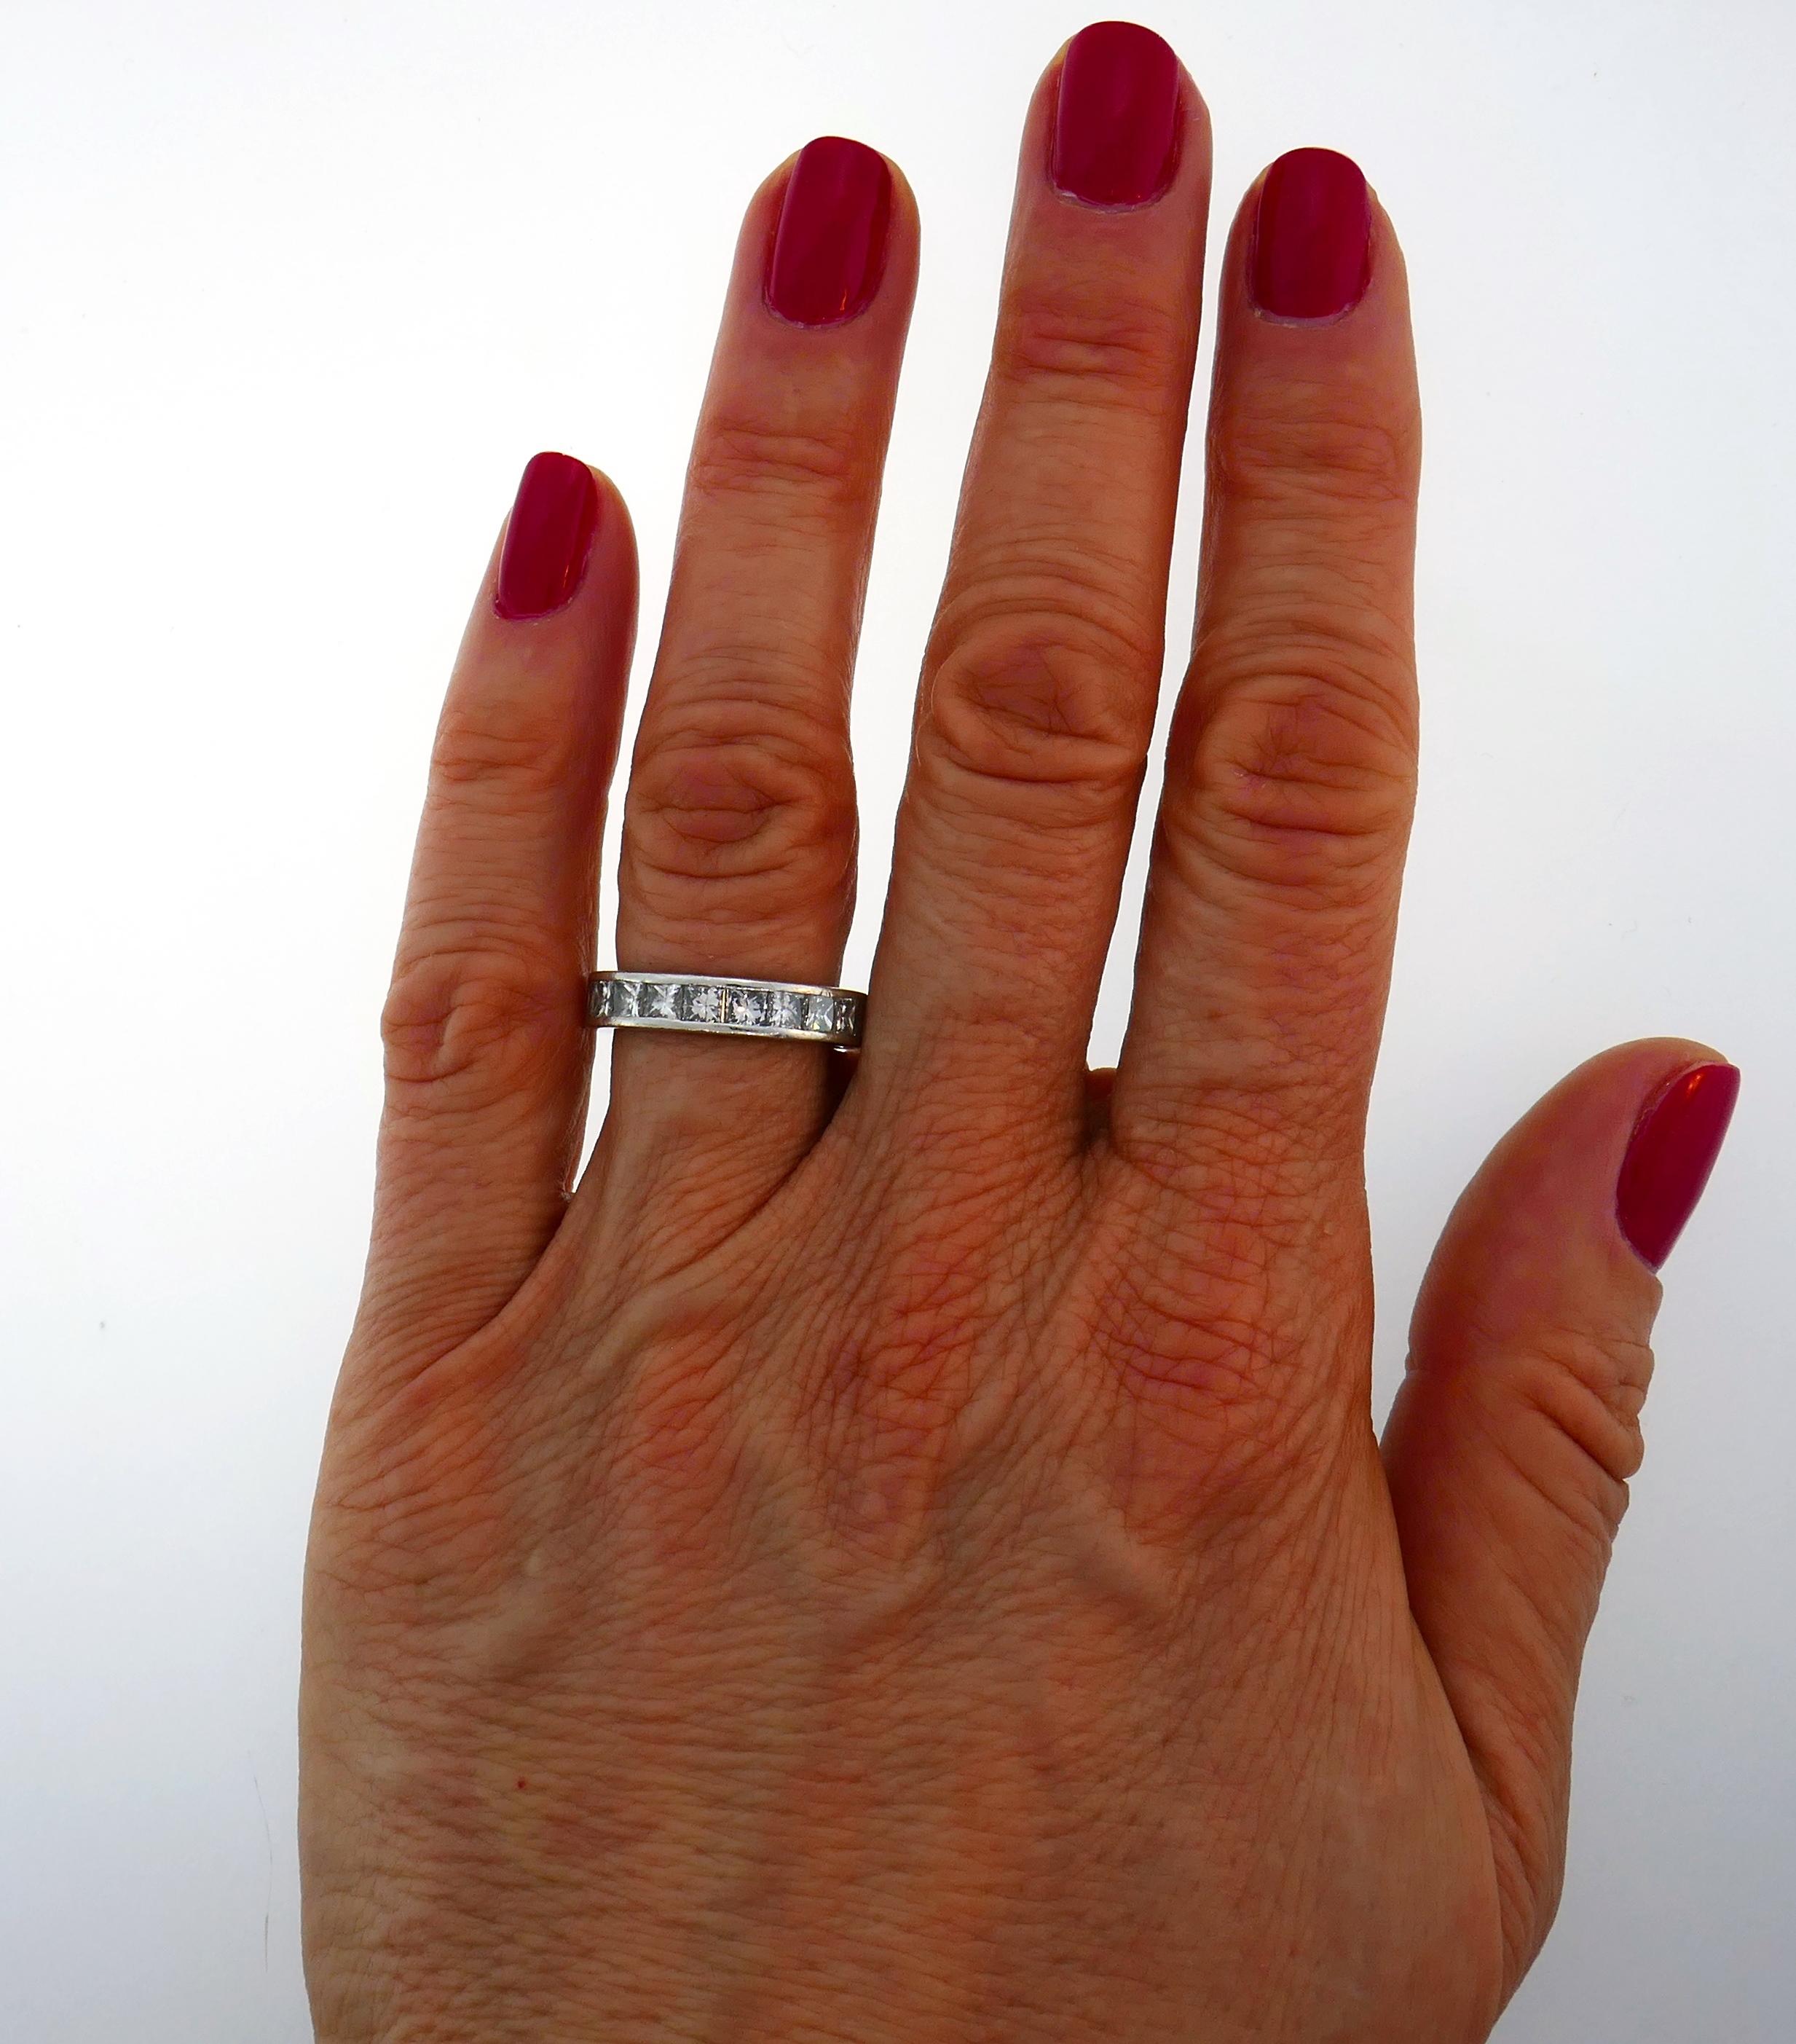  Classy and timeless diamond eternity band.
Made of platinum and set with twenty-three princess cut diamonds of approximately 0.15-carat each. Diamonds are G-H color VS clarity, total weight approximately 3.45 carats. 
The band is size 6, 4.3